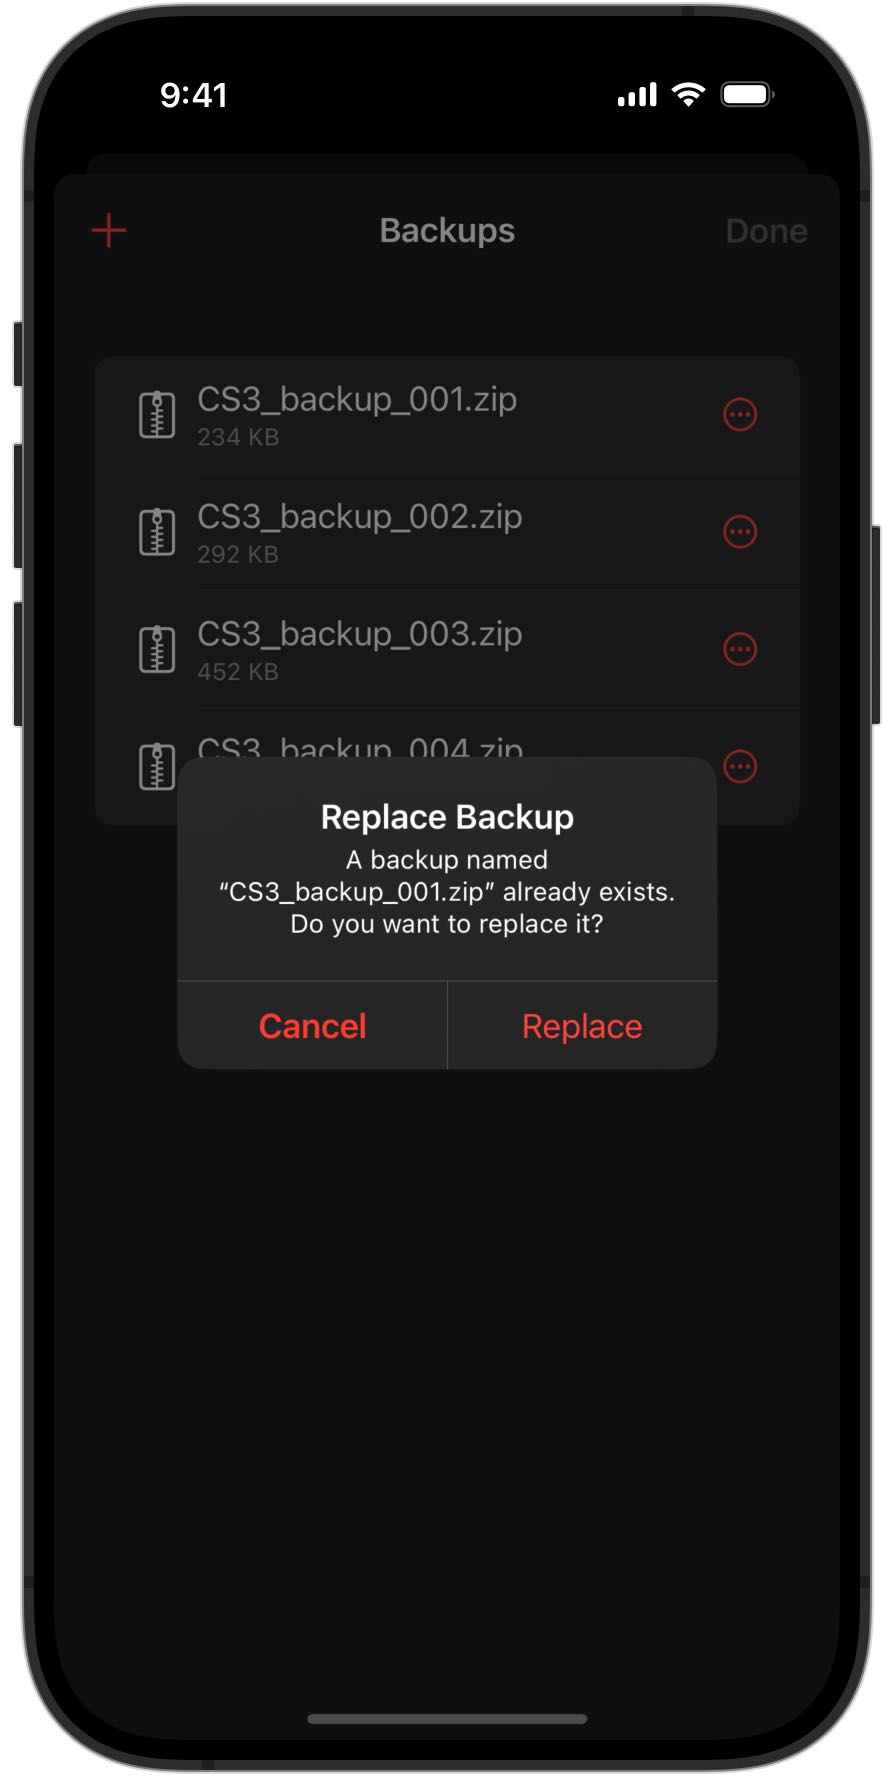 Screenshot of an iPhone asking to replace a backup in RailControl Pro